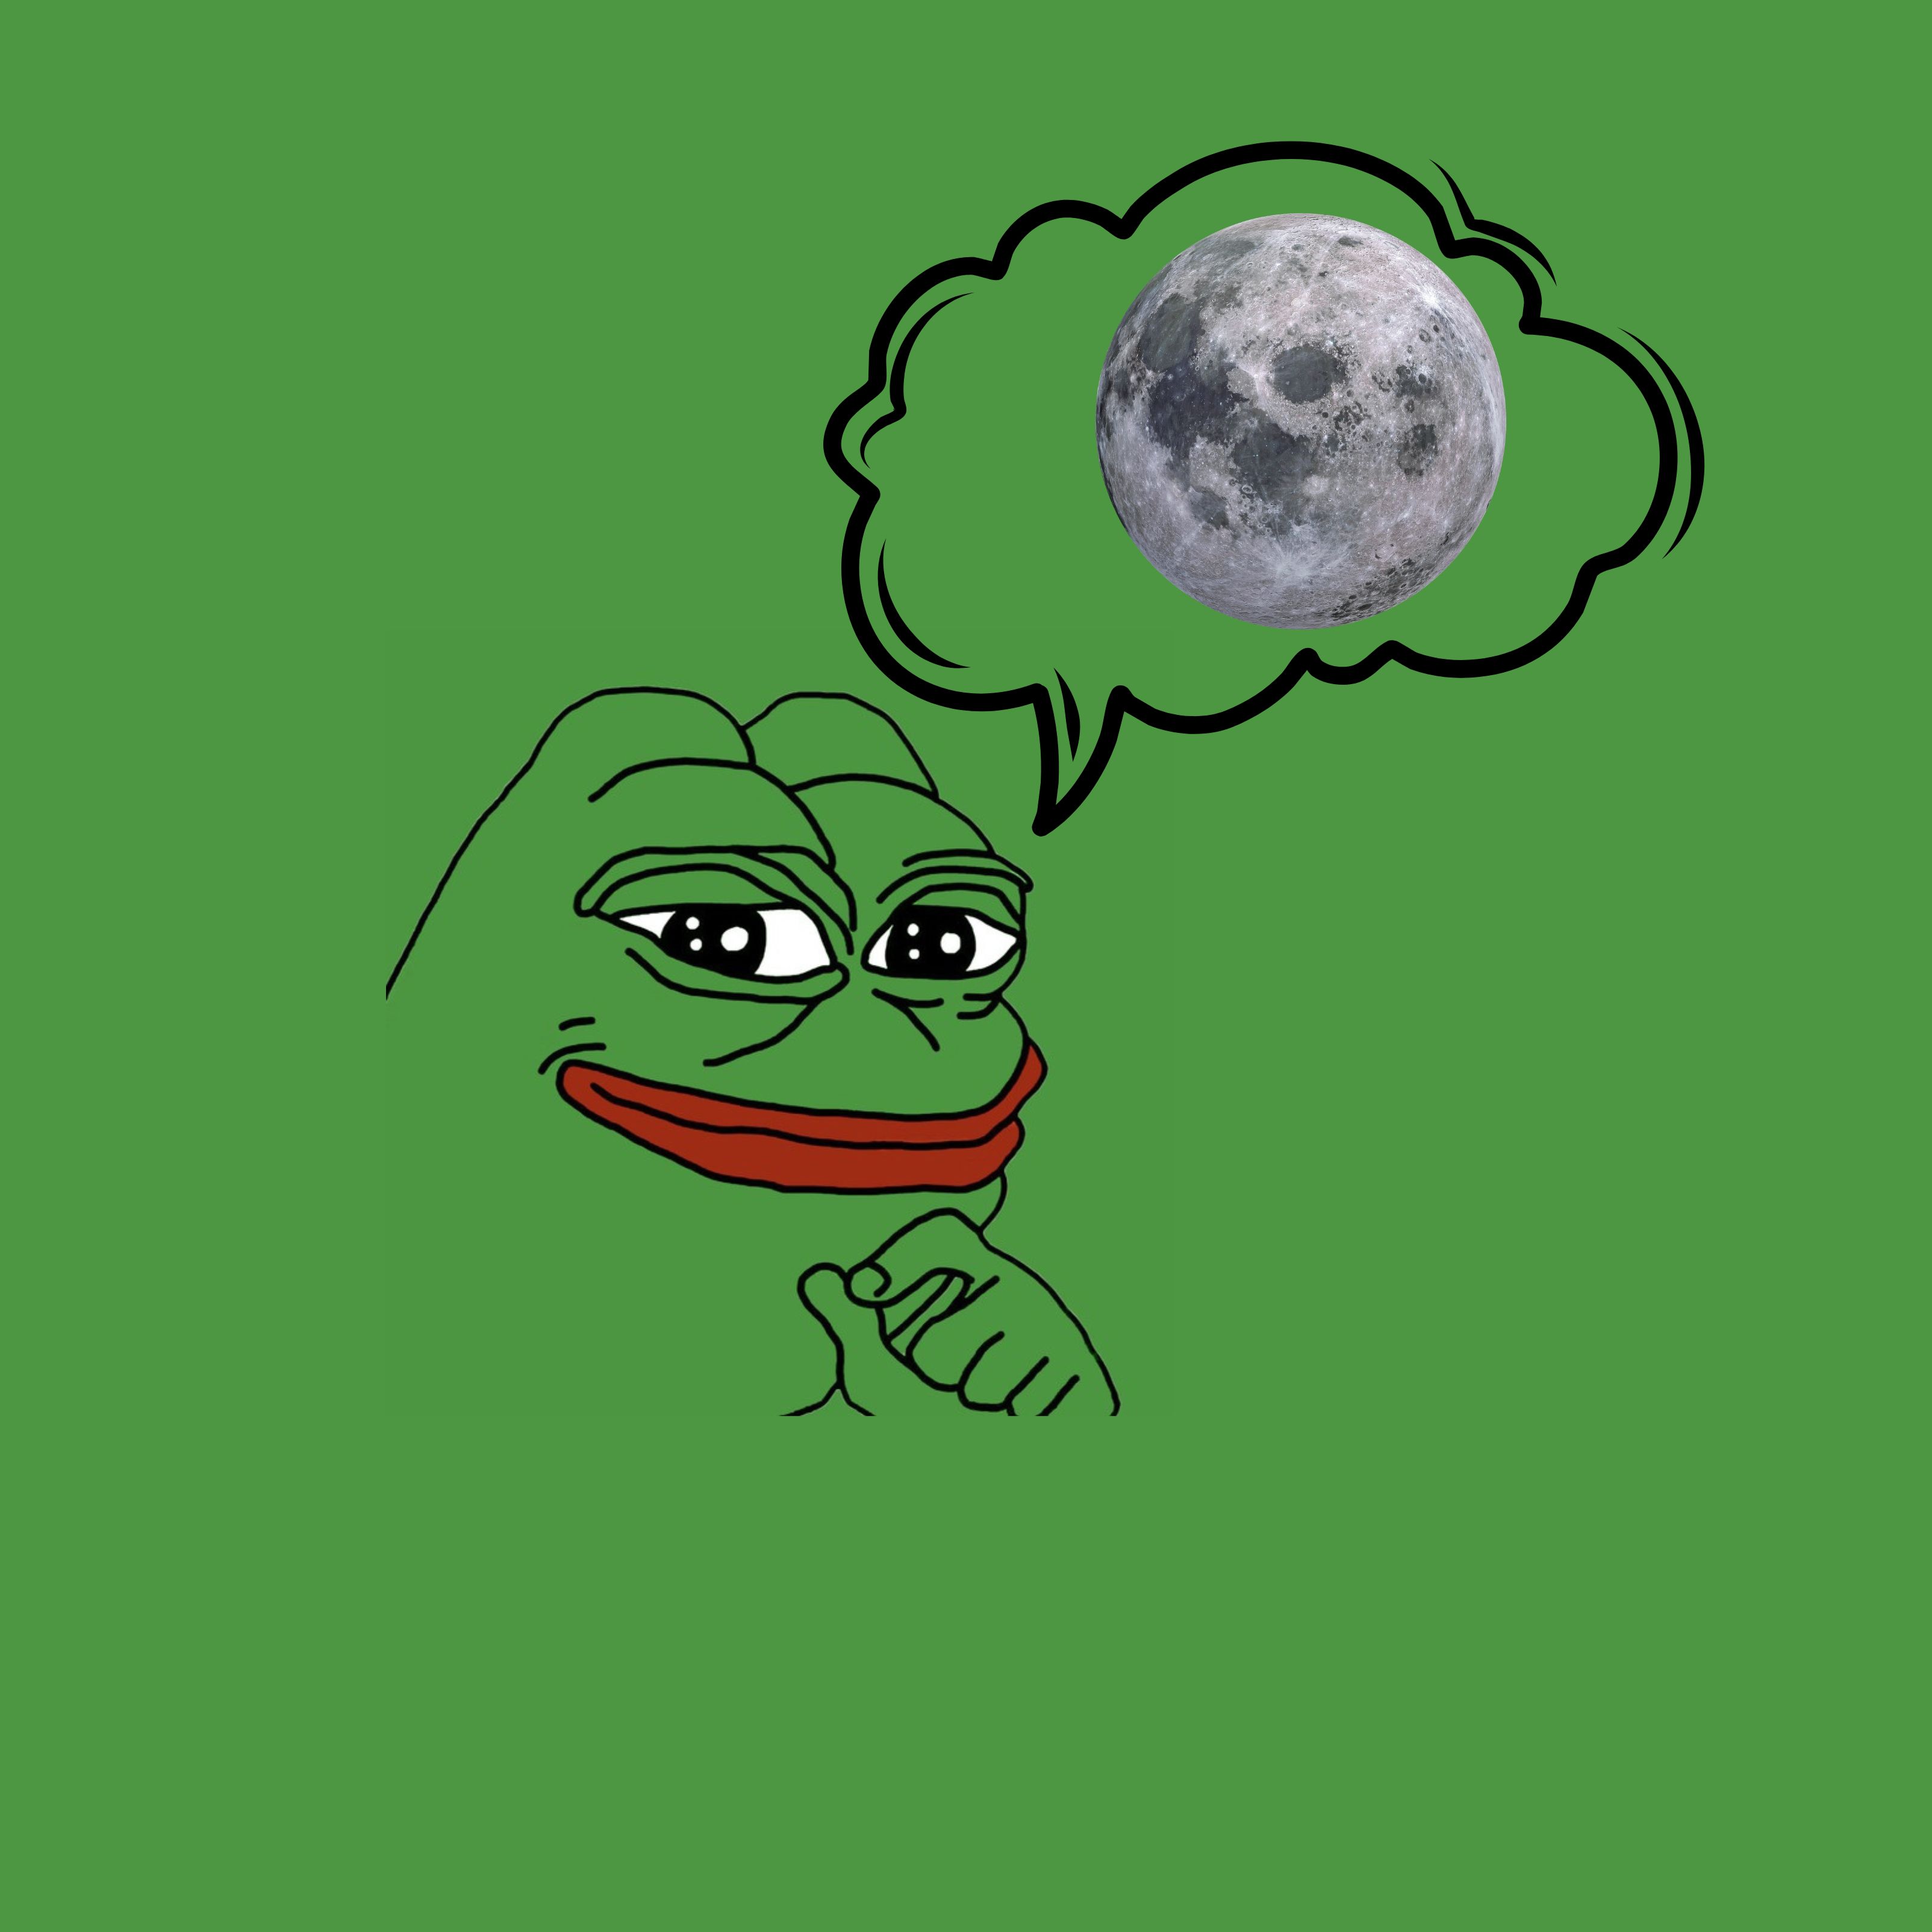 iPad Wallpapers Pepe Wallpaper Dreaming of Moon 3208x3208 px